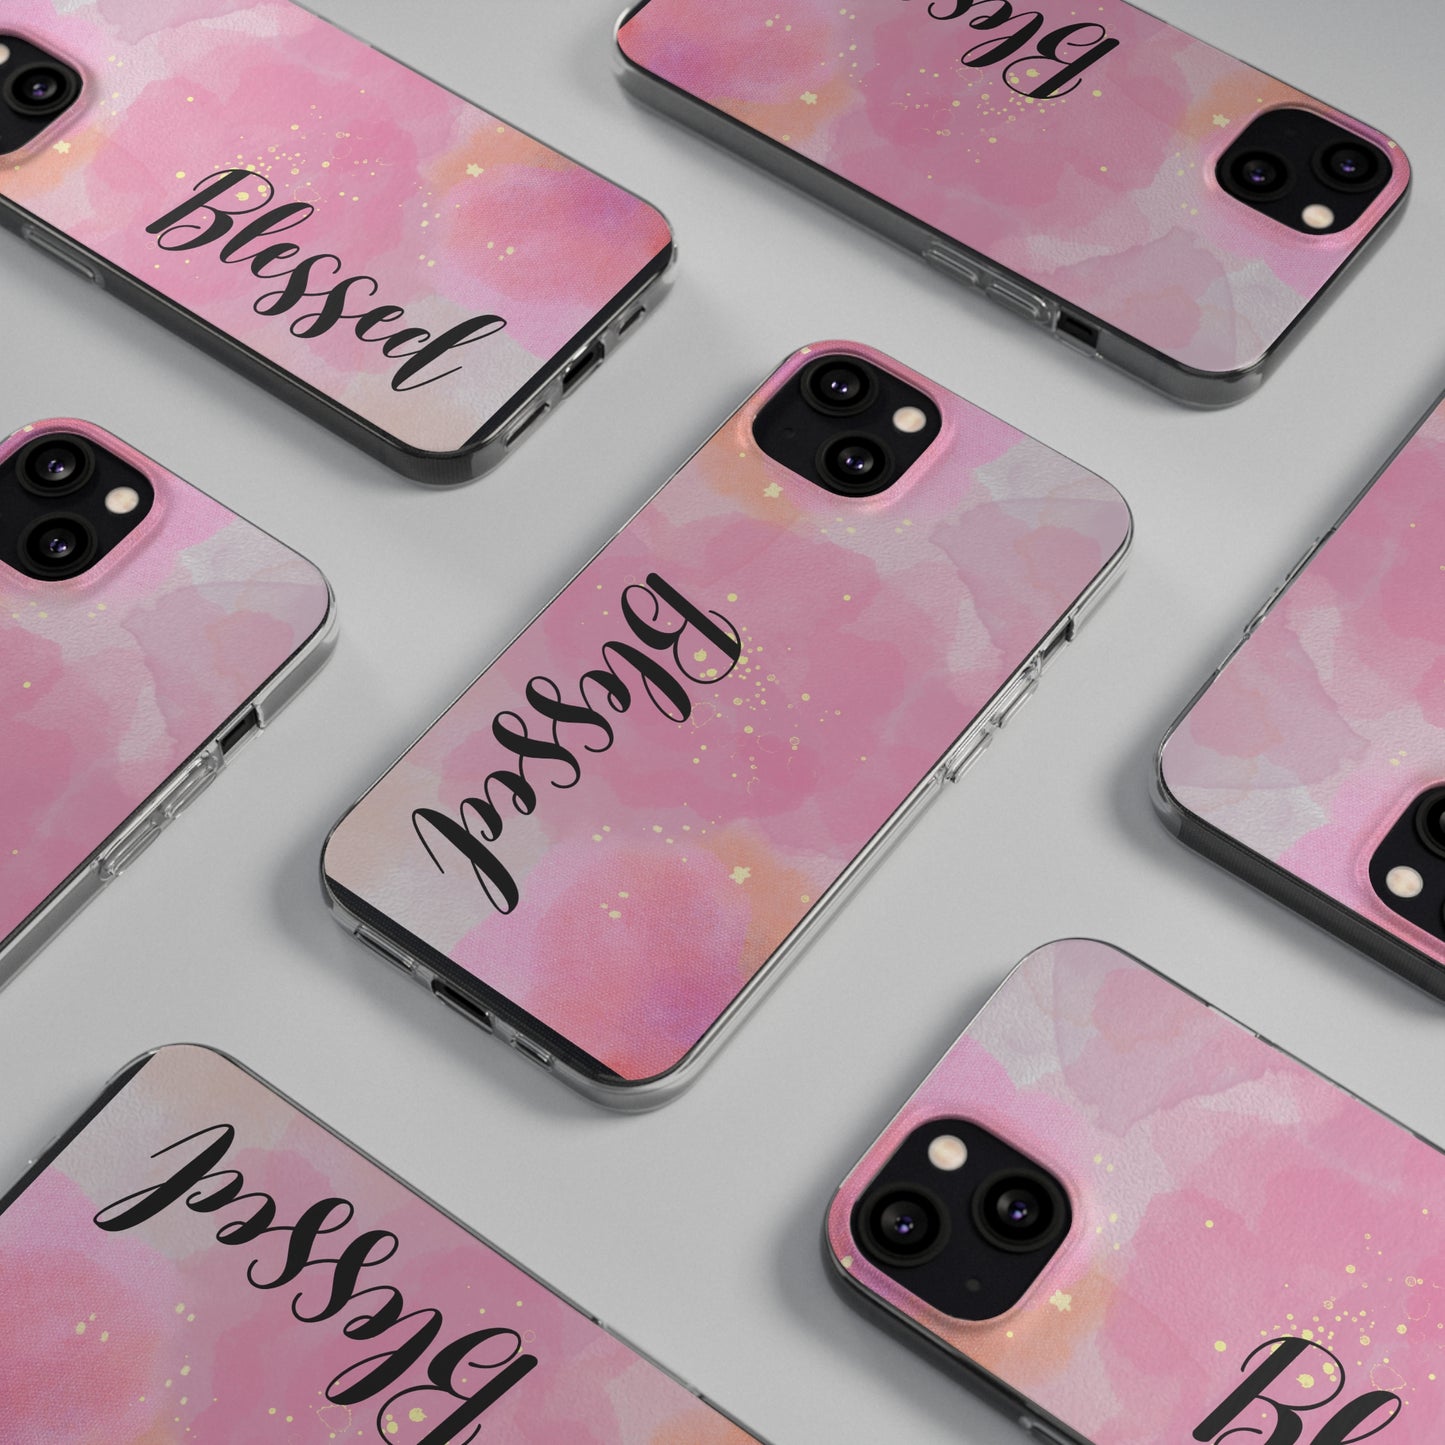 Blessed - iPhone Case - FREE SHIPPING